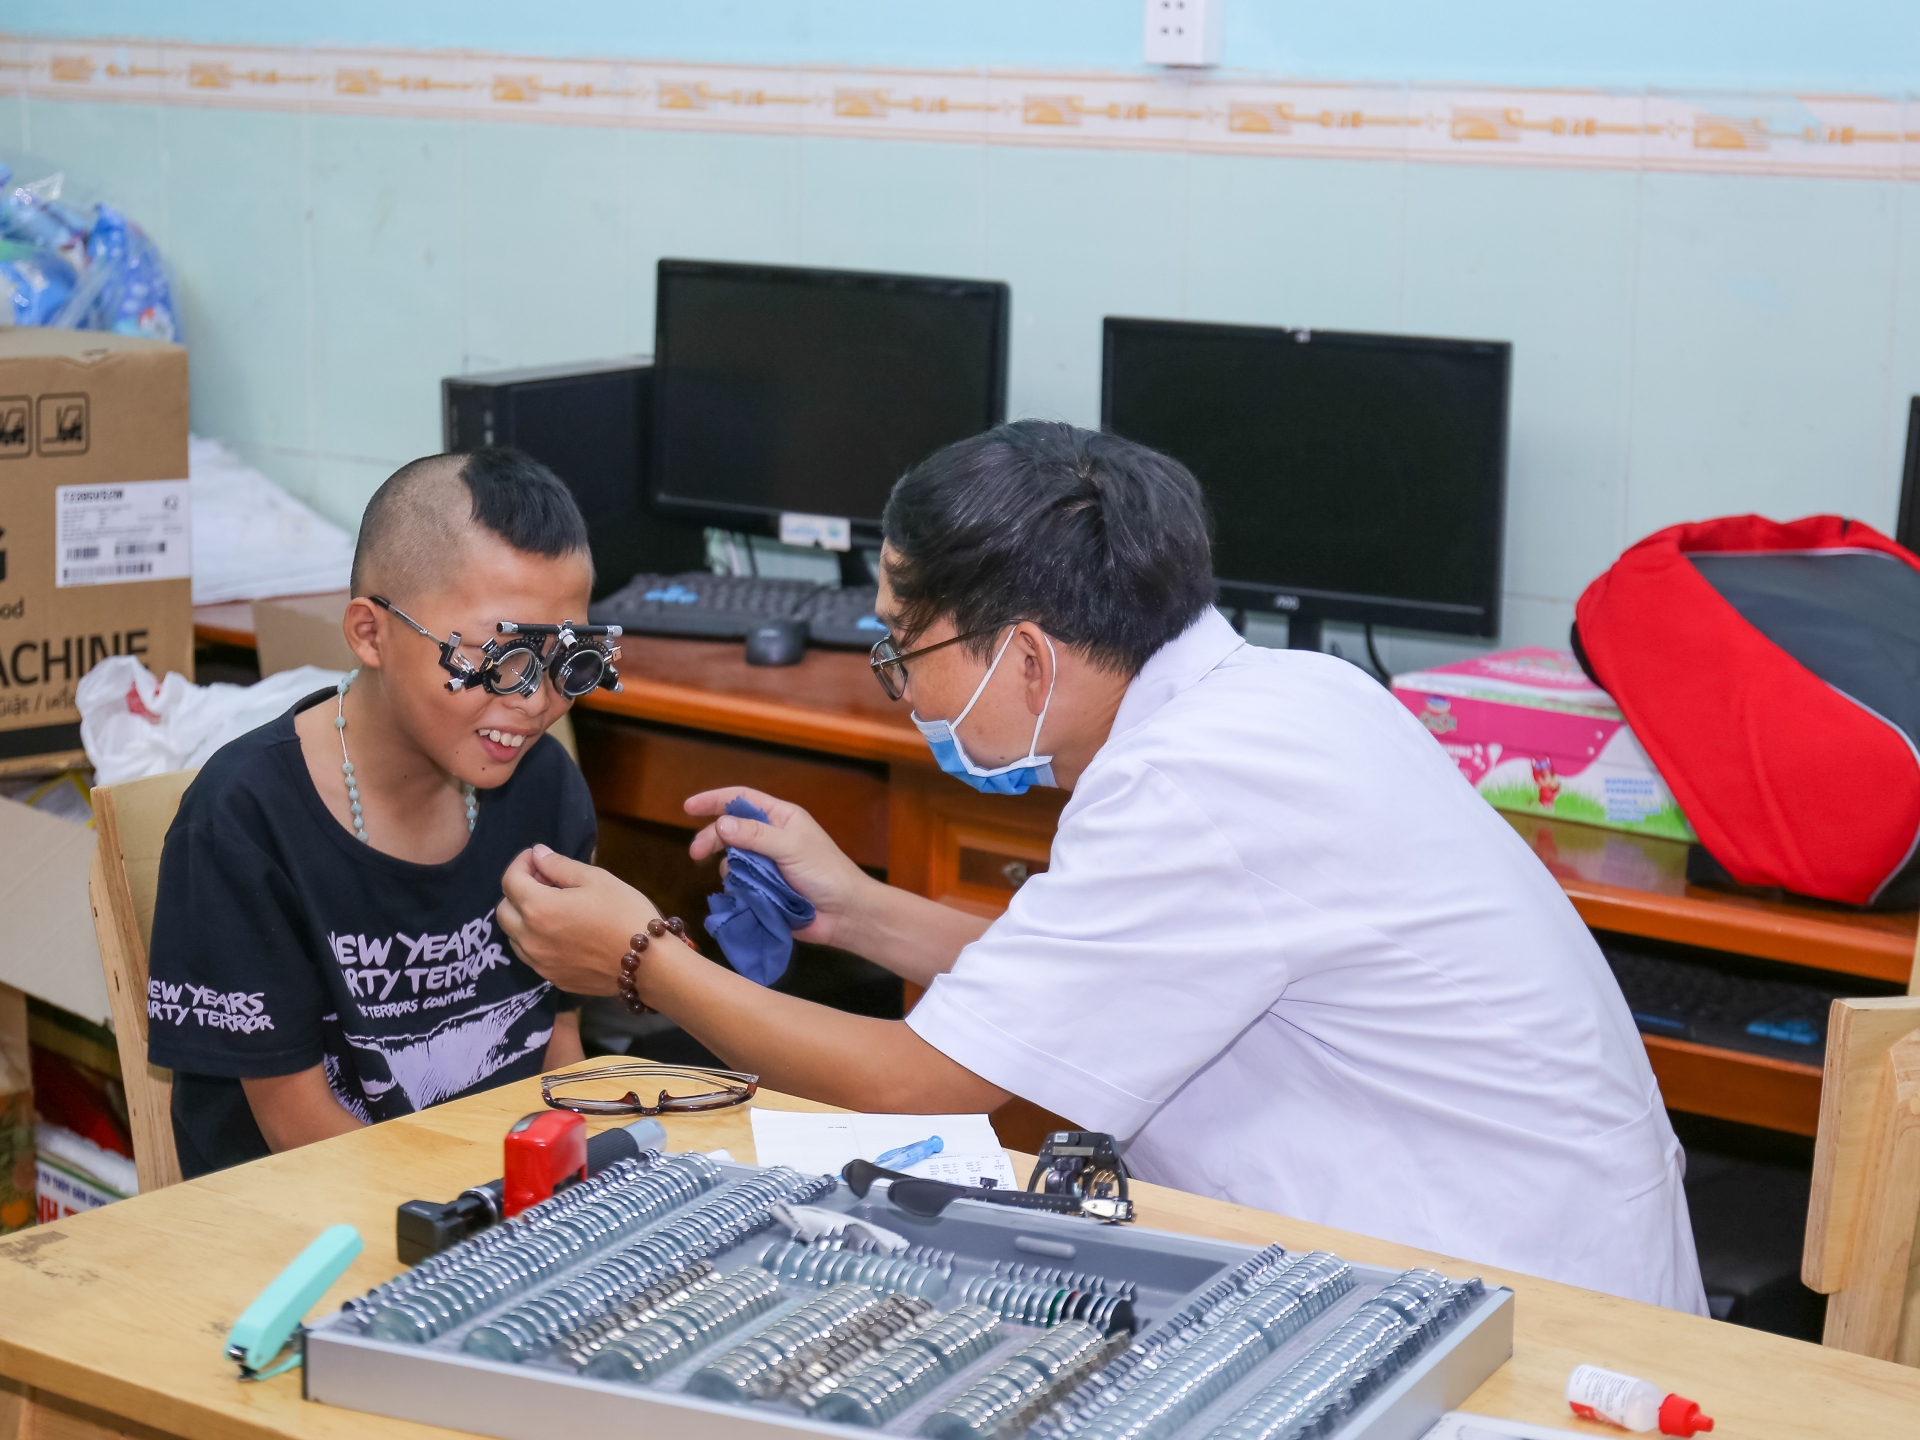 A doctor performs an eye examination on a child using ZEISS diagnostic instruments.